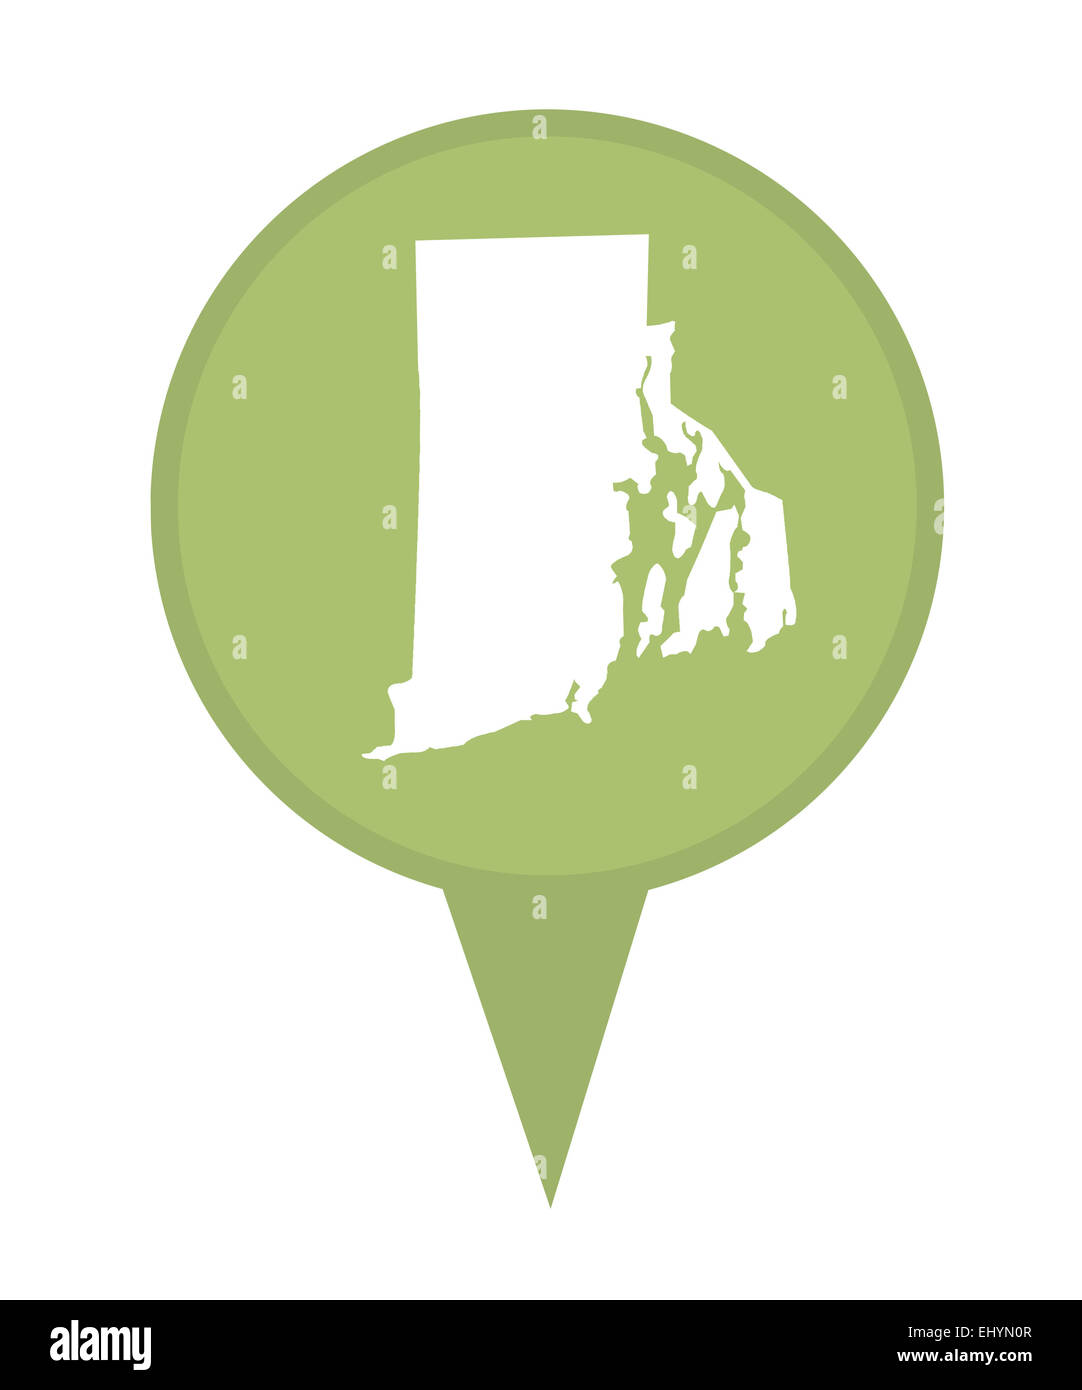 American state of Rhode Island marker pin isolated on a white background. Stock Photo